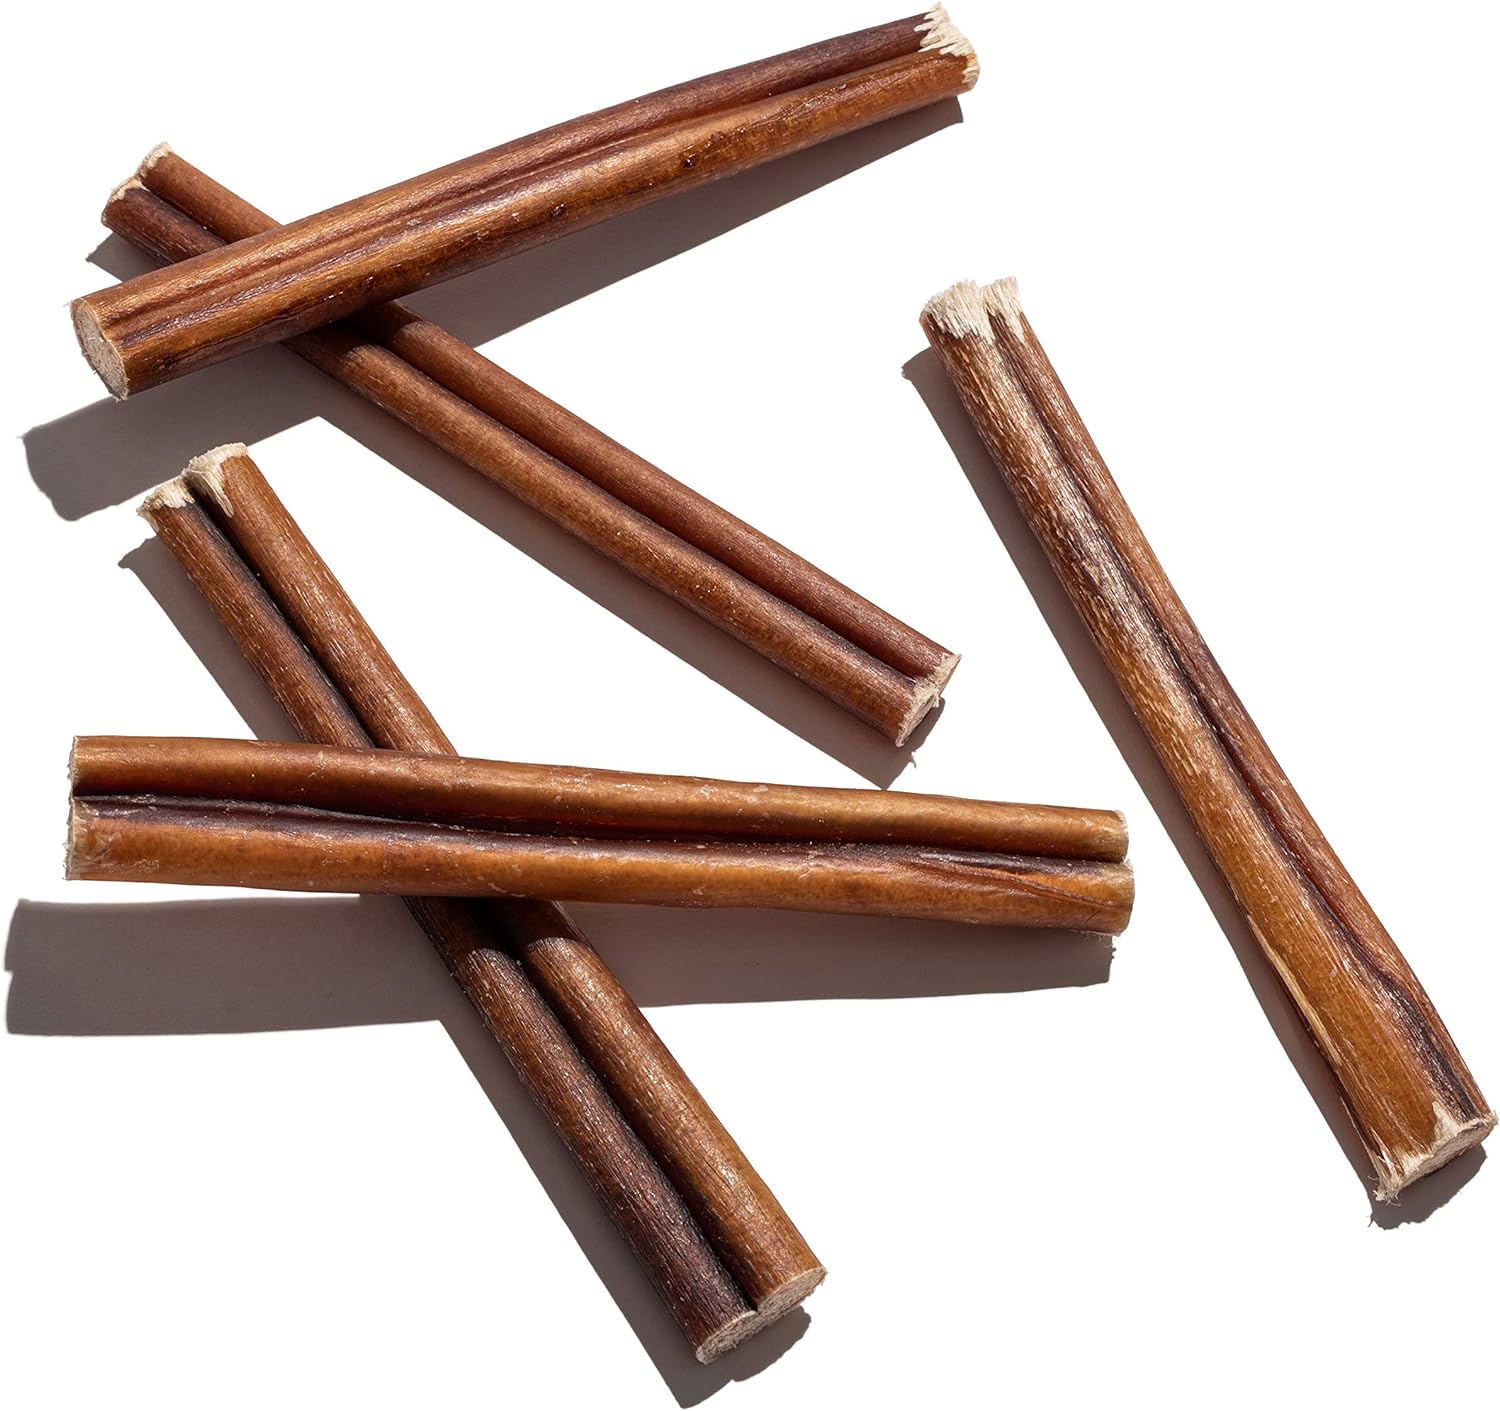 Jack&Pup Premium 6 Inch Thick Bully Sticks for Medium Dogs, Dog Bully Sticks for Small Dogs -6" Bully Sticks for Puppies Natural Bully Sticks Odor Free Long Lasting Dog Chews, Beef Bully Stick (40 pk) : Pet Supplies